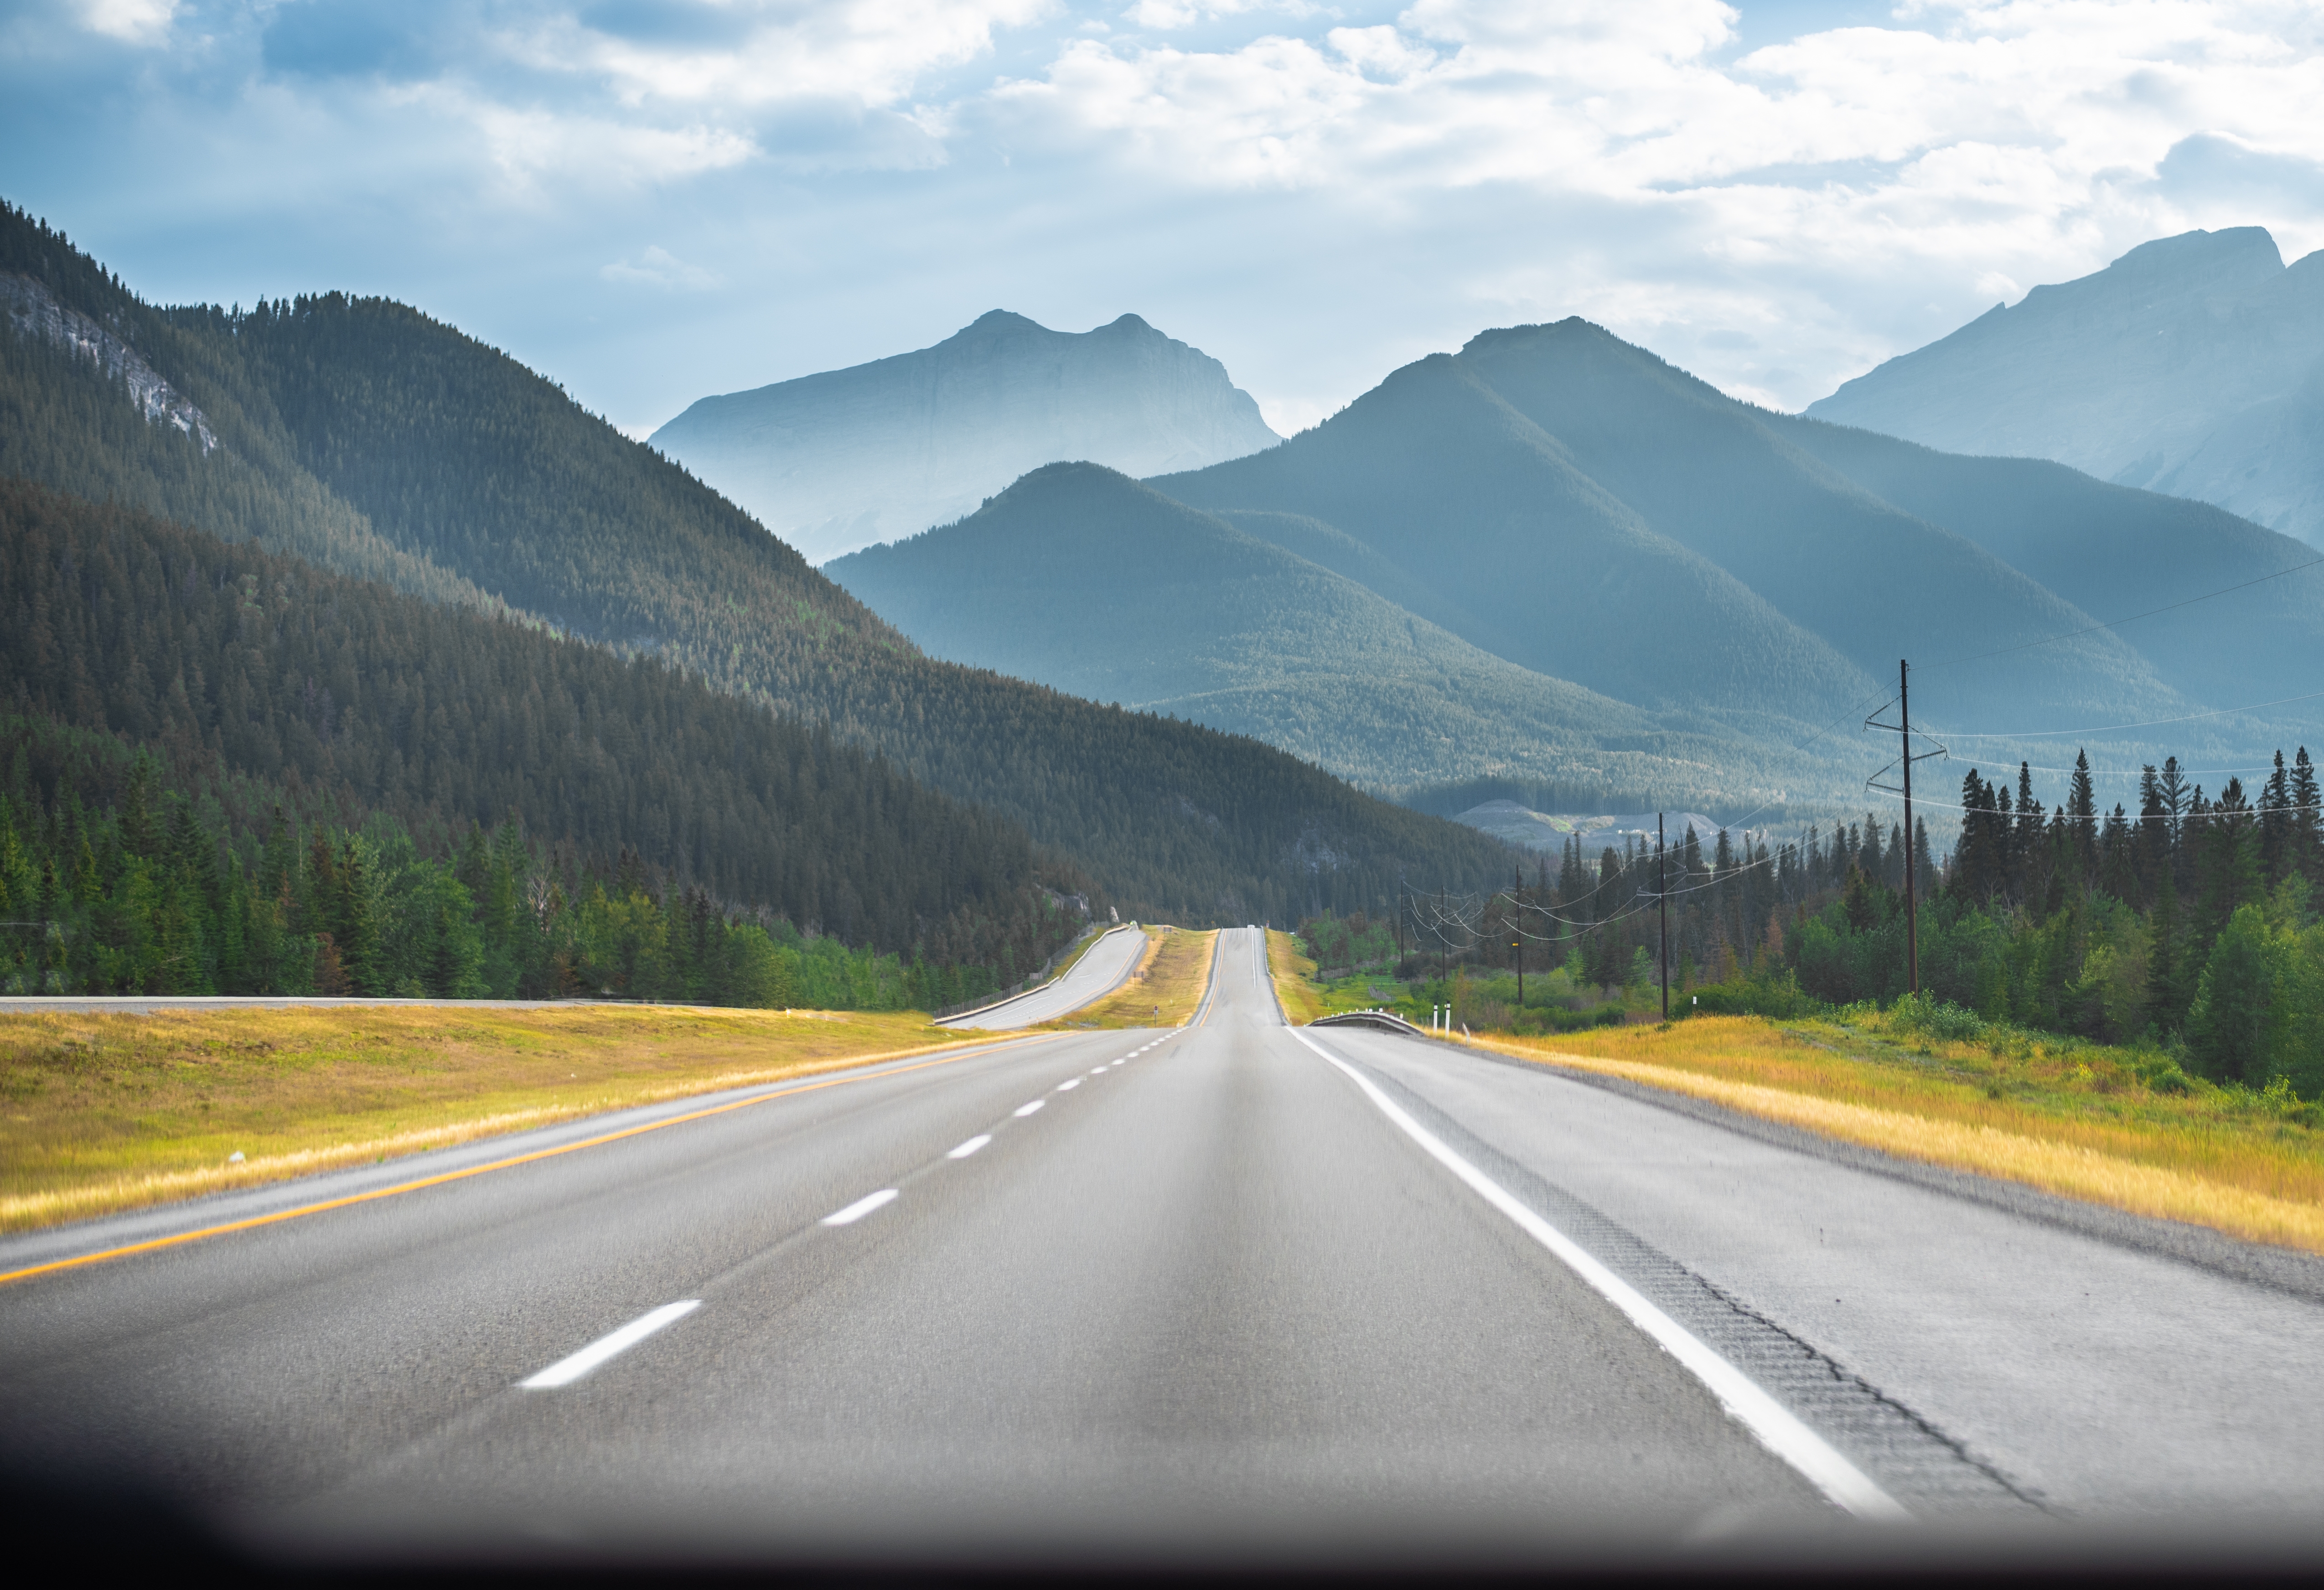 Driving down an empty road | Source: Shutterstock